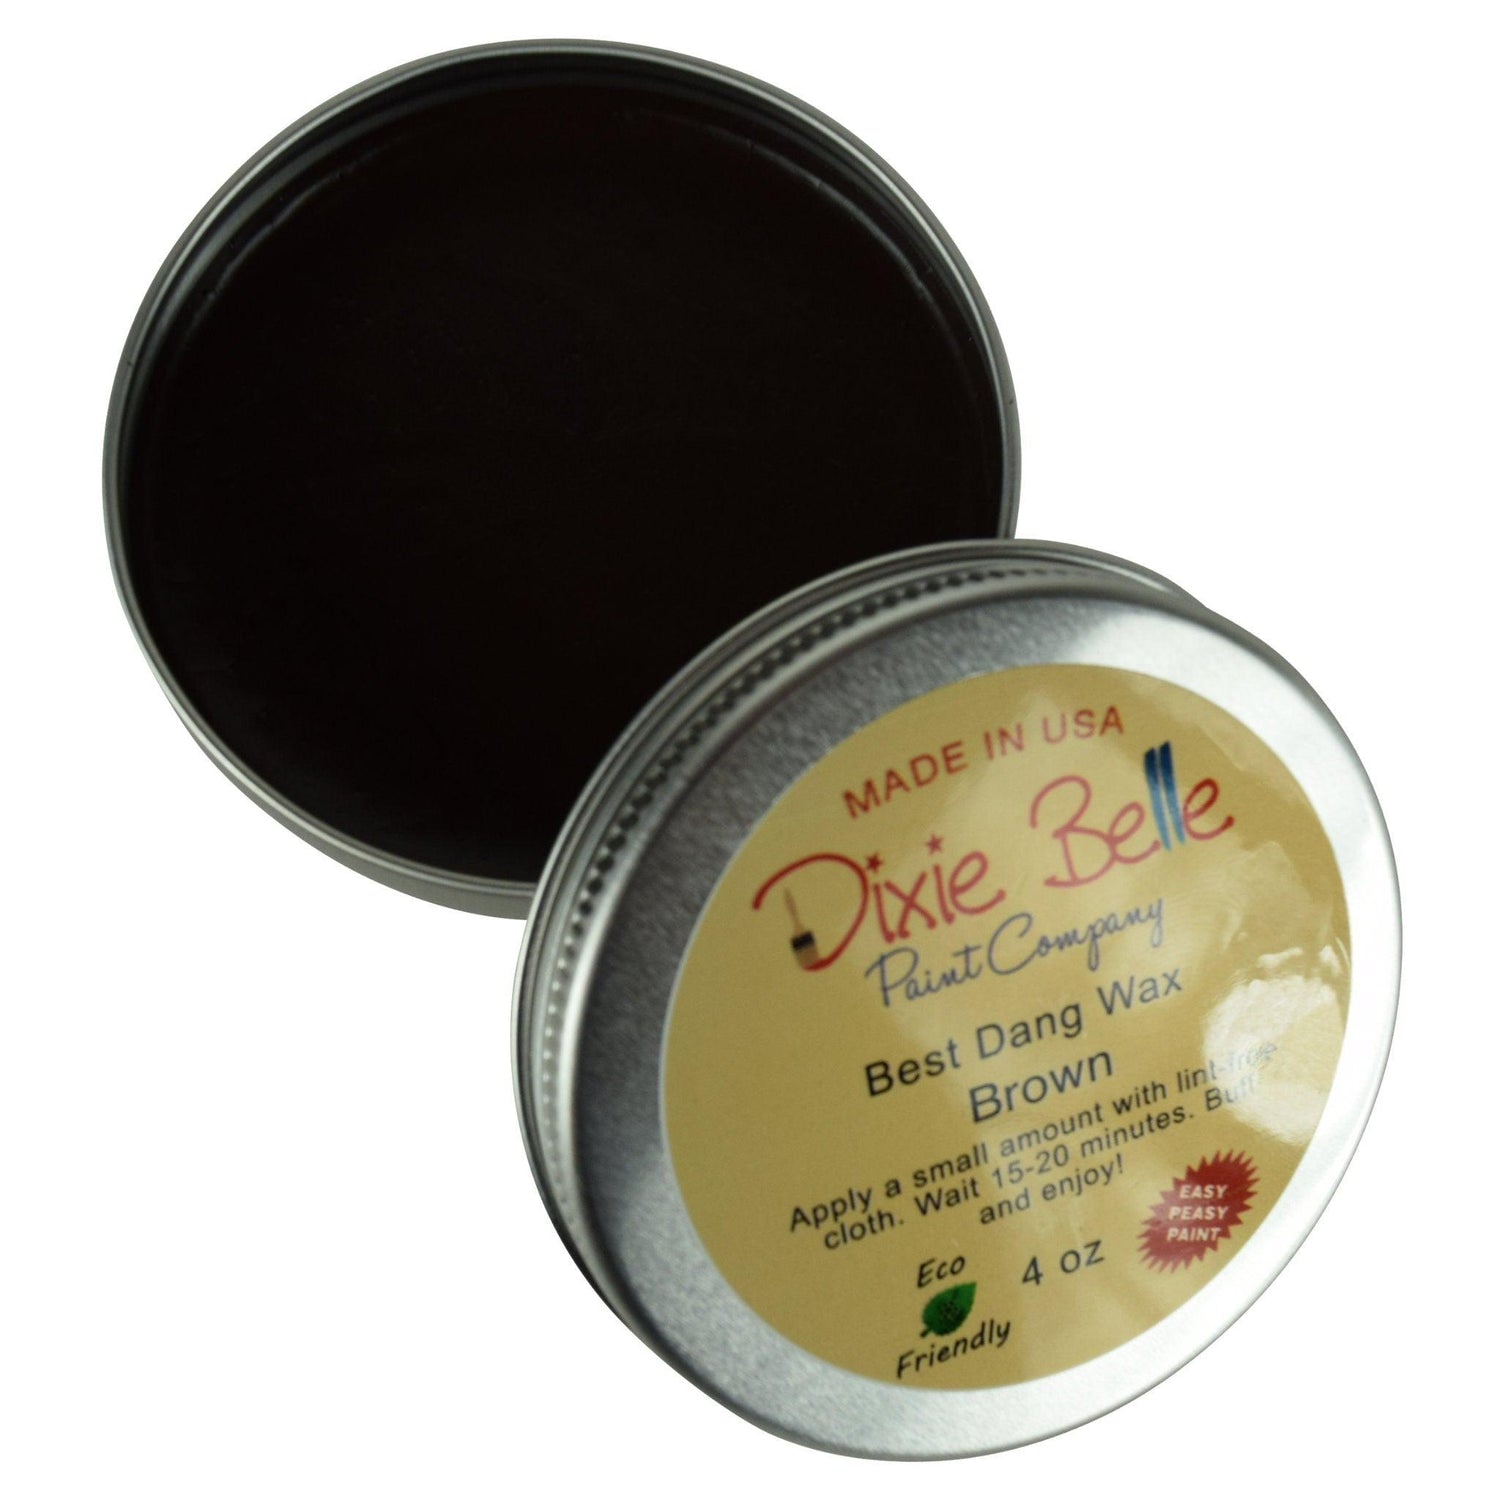 Best Dang Wax by Dixie Belle Paint - Same Day Shipping - Furniture